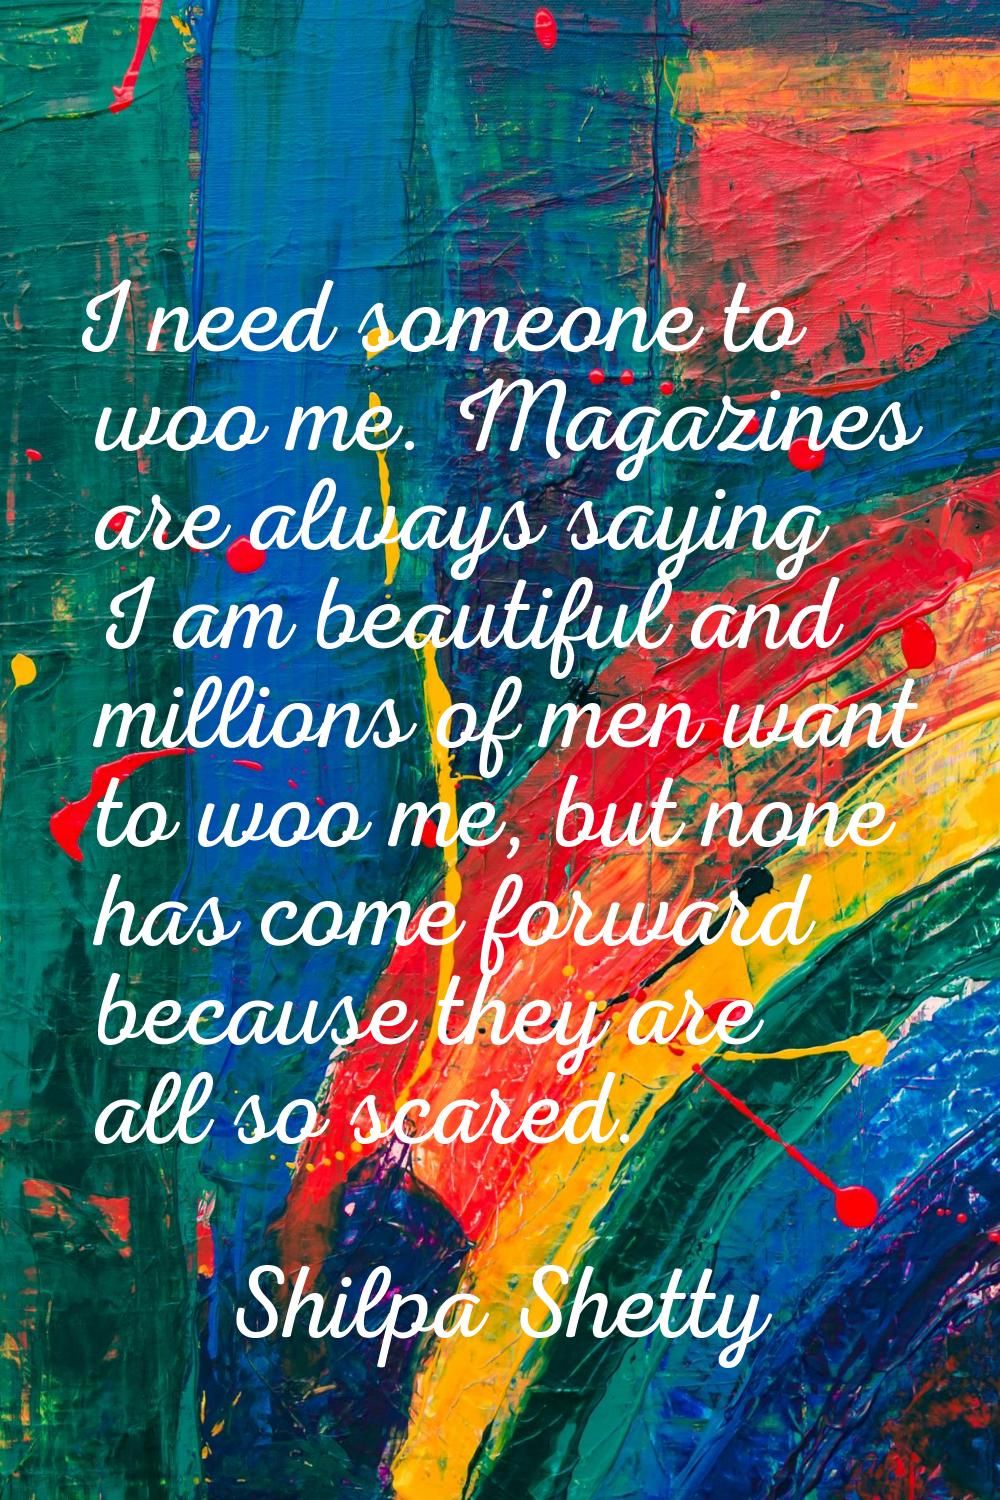 I need someone to woo me. Magazines are always saying I am beautiful and millions of men want to wo